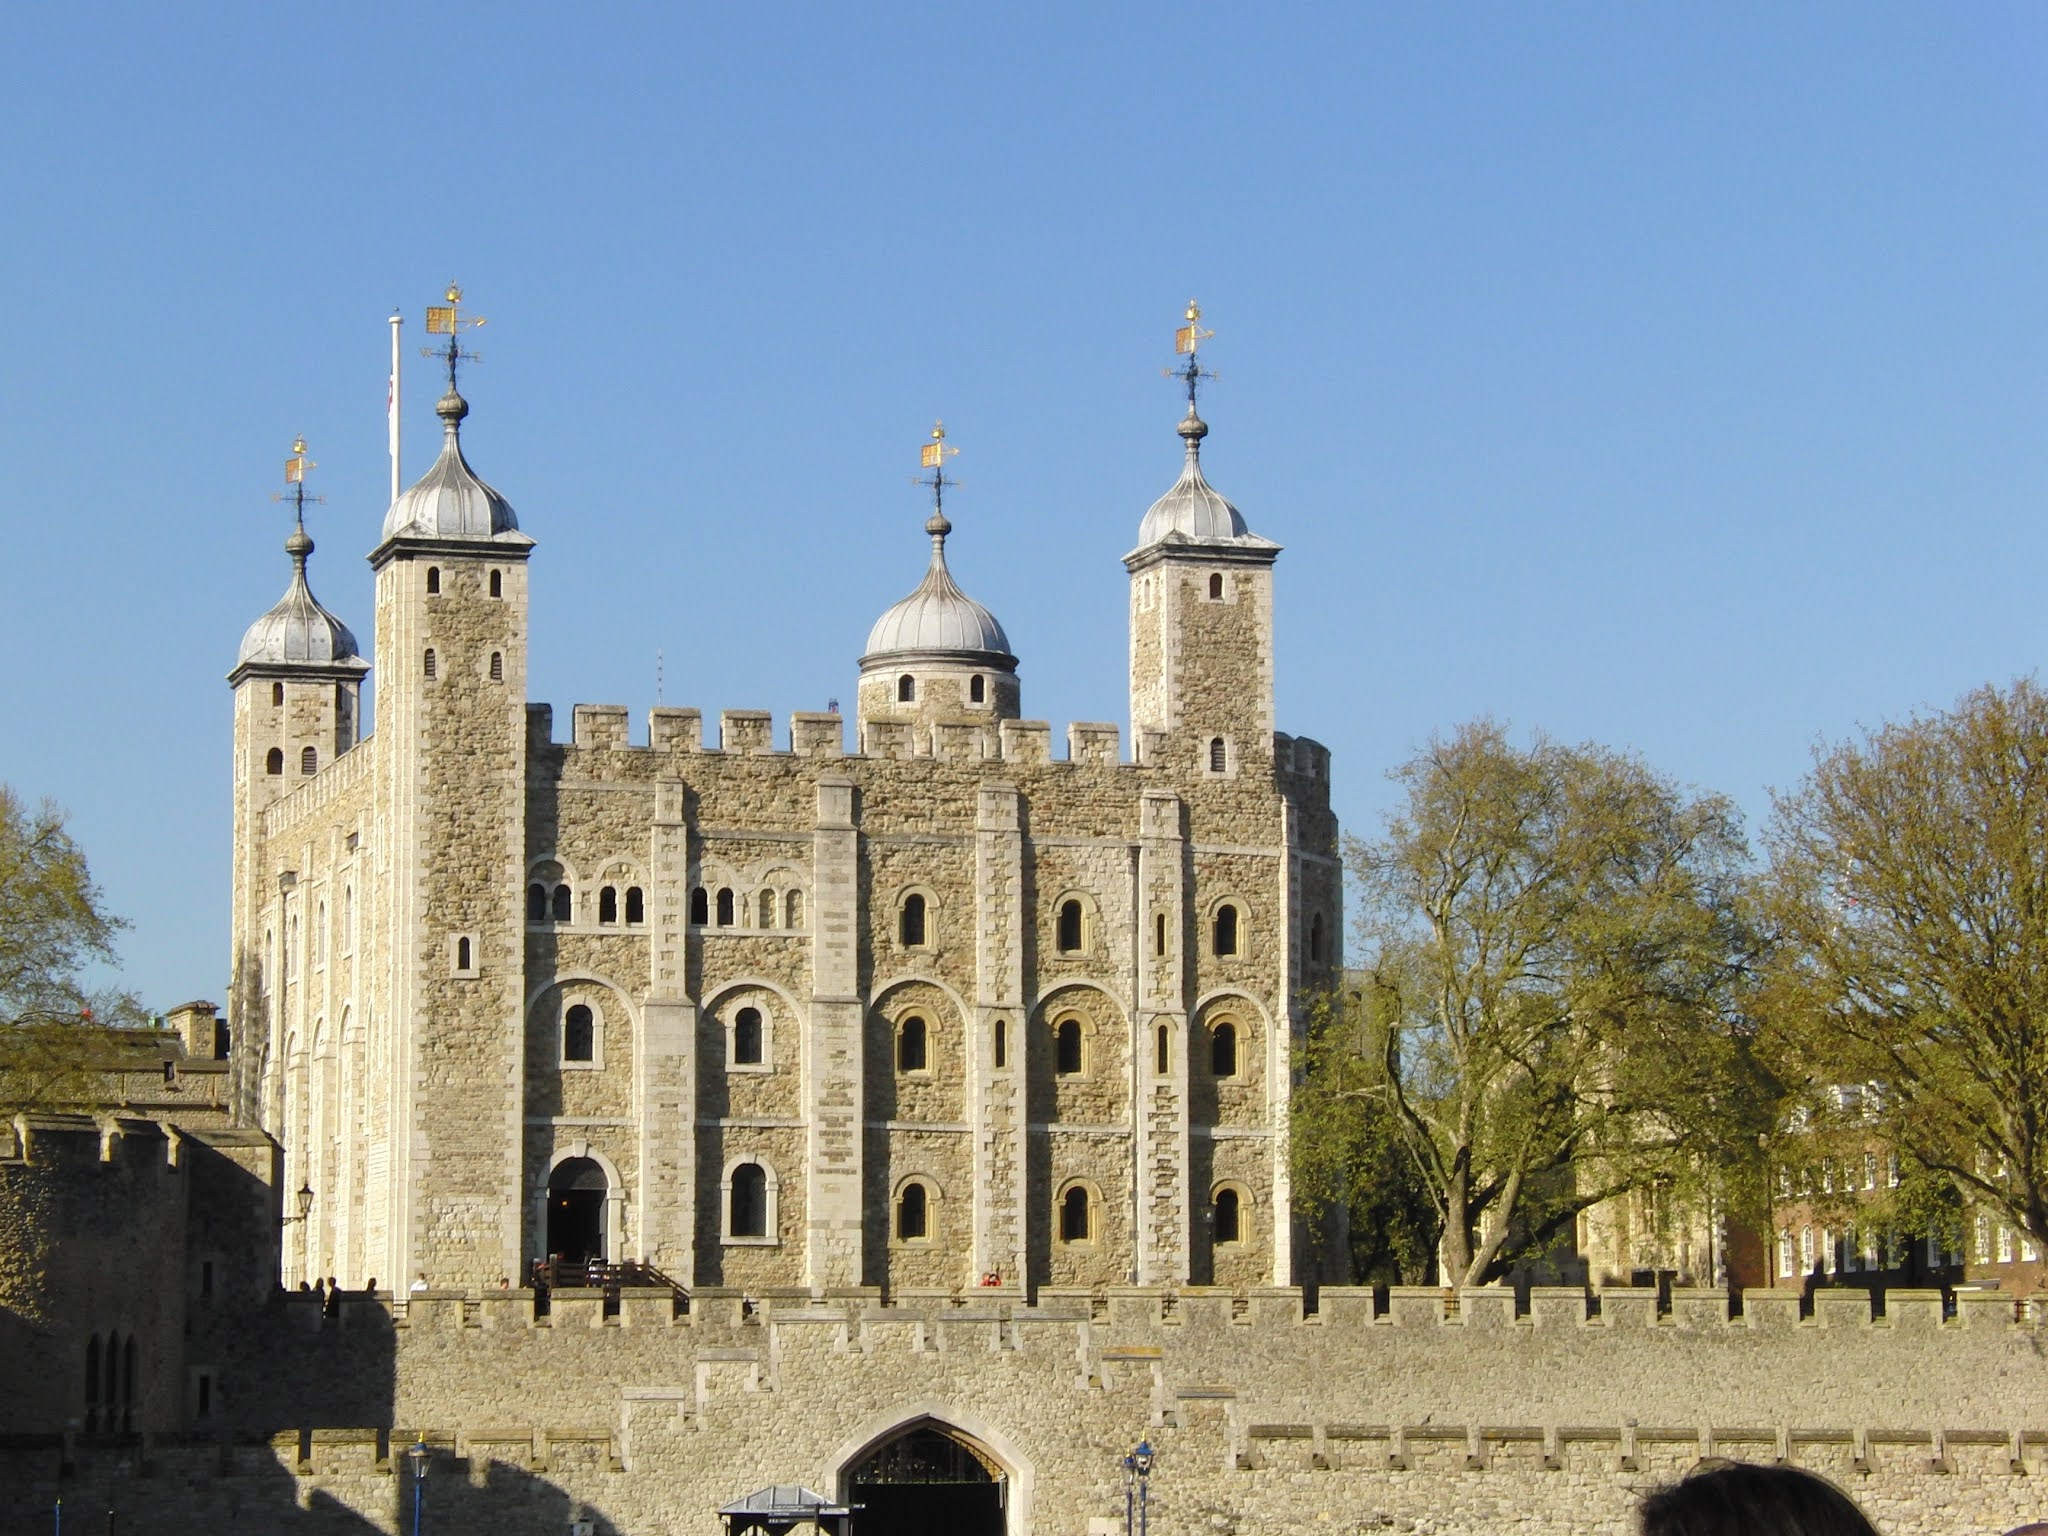 The World Heritage In Great Britain - Tower Of London